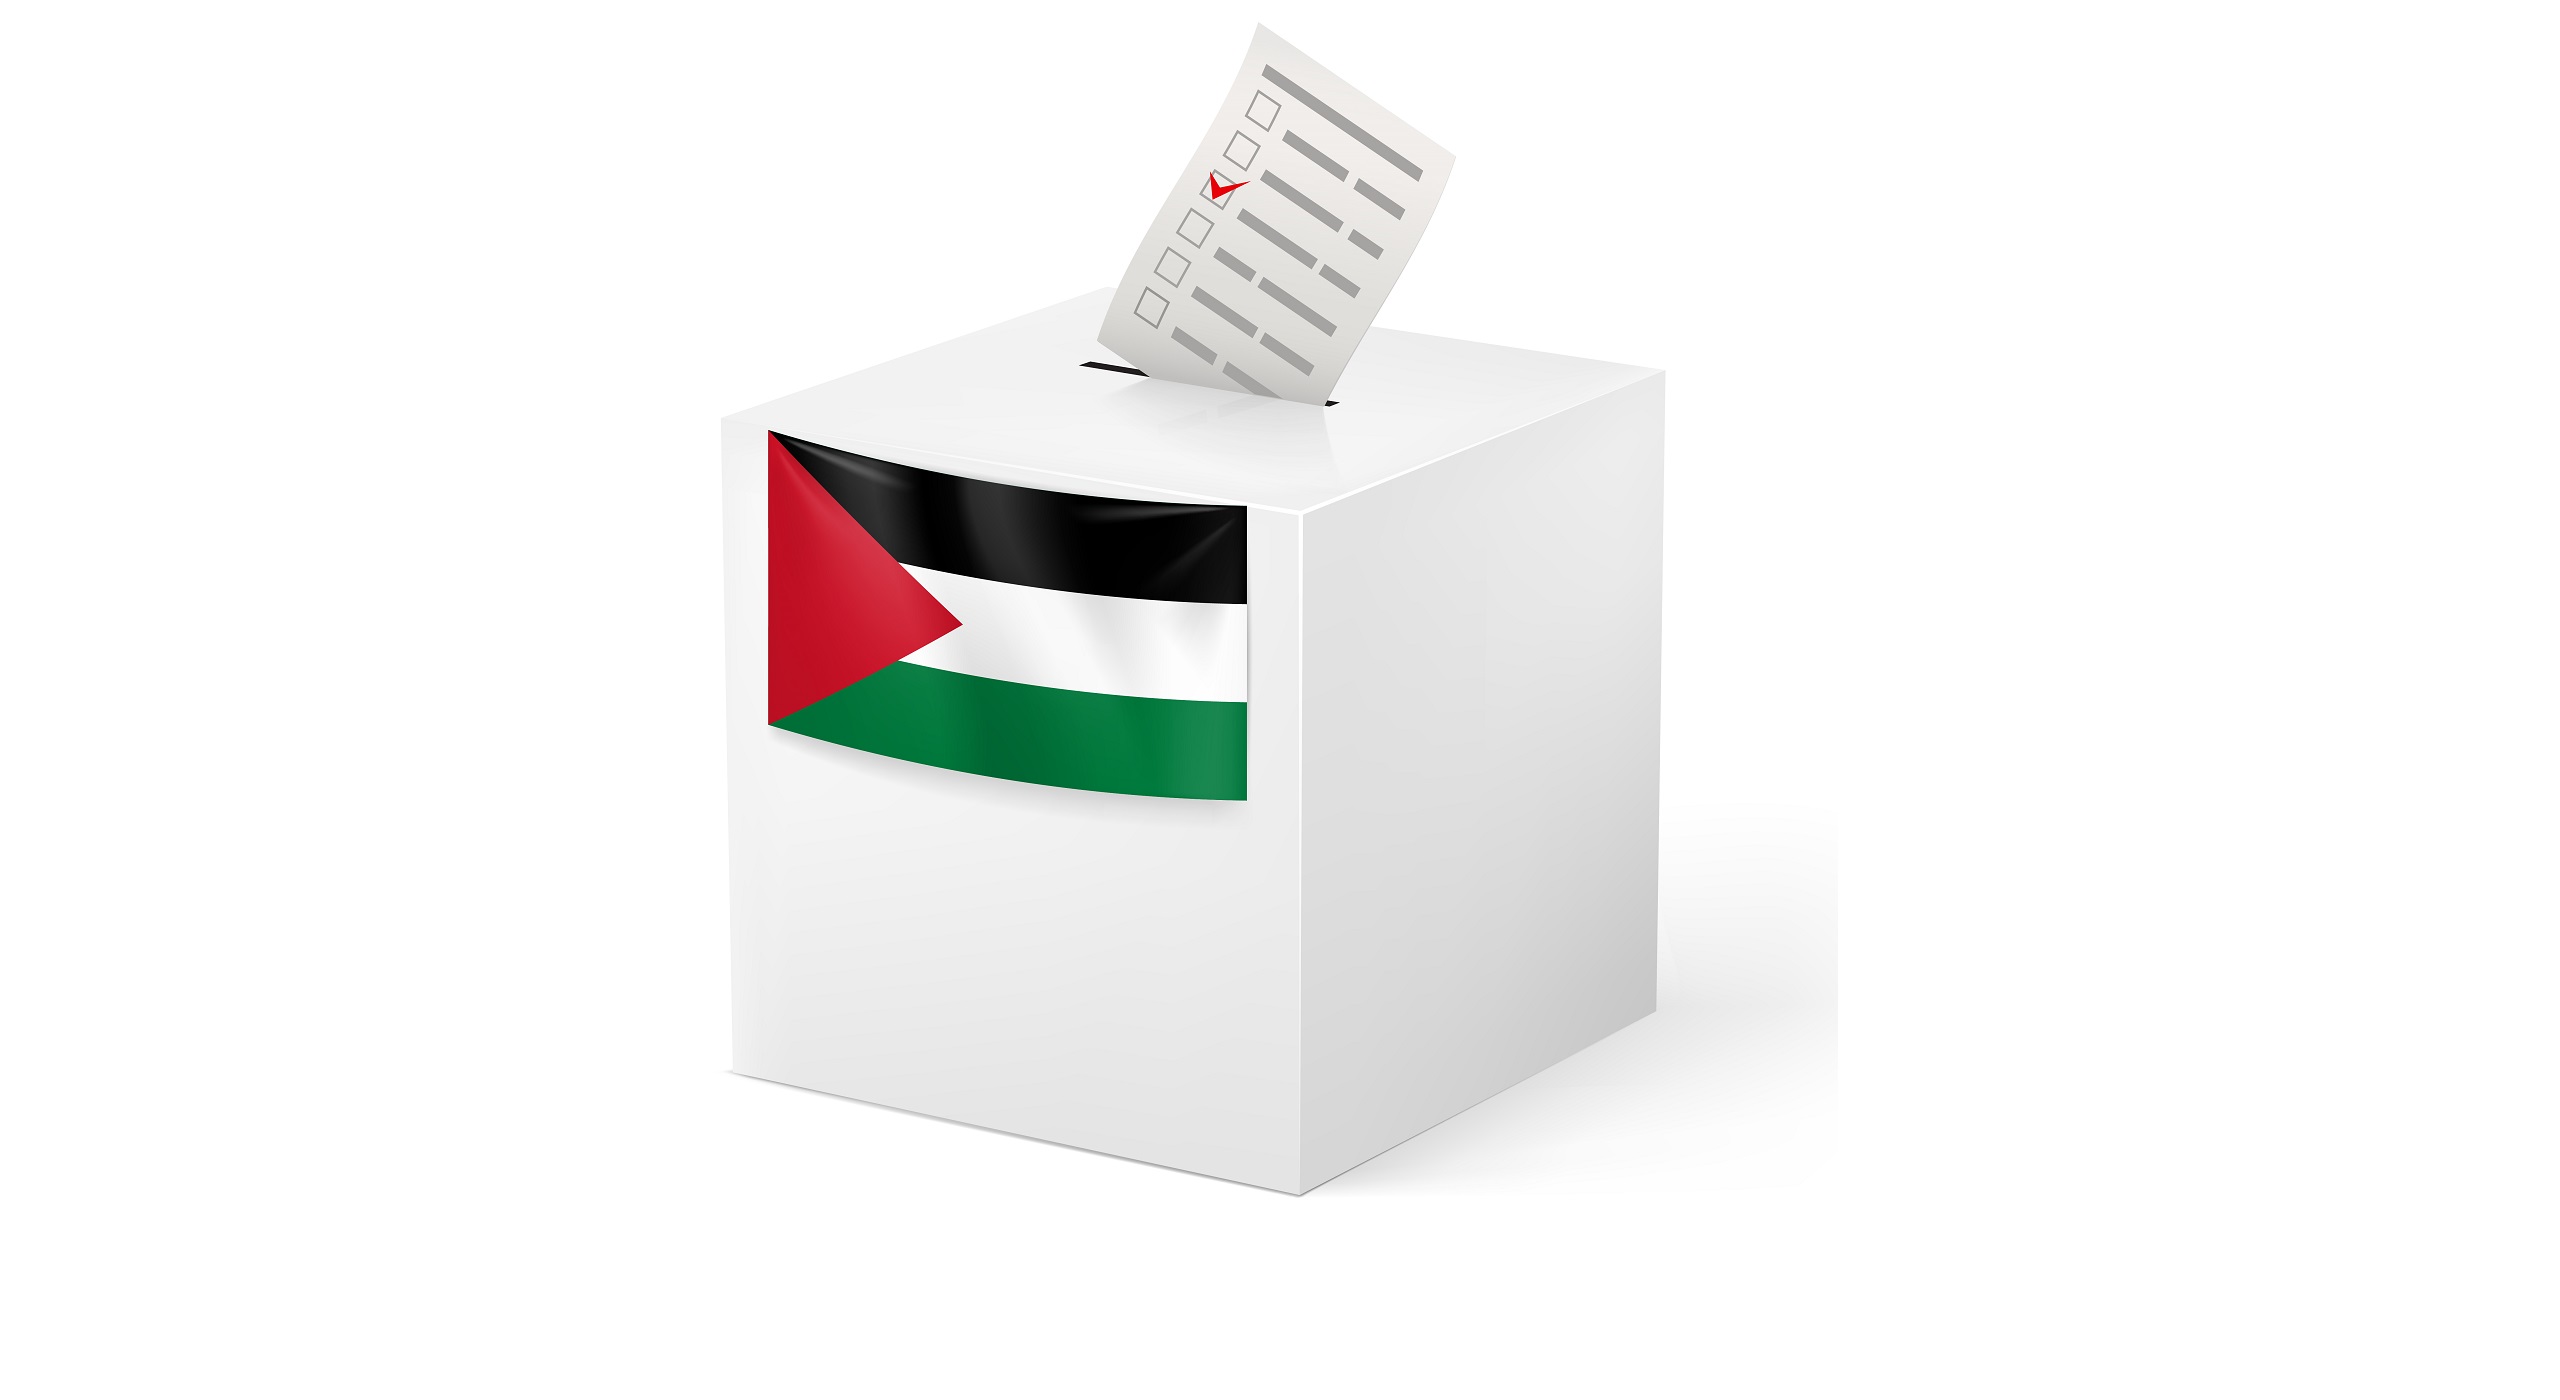 Palestinian Election Landmines are Being Slowly Dismantled